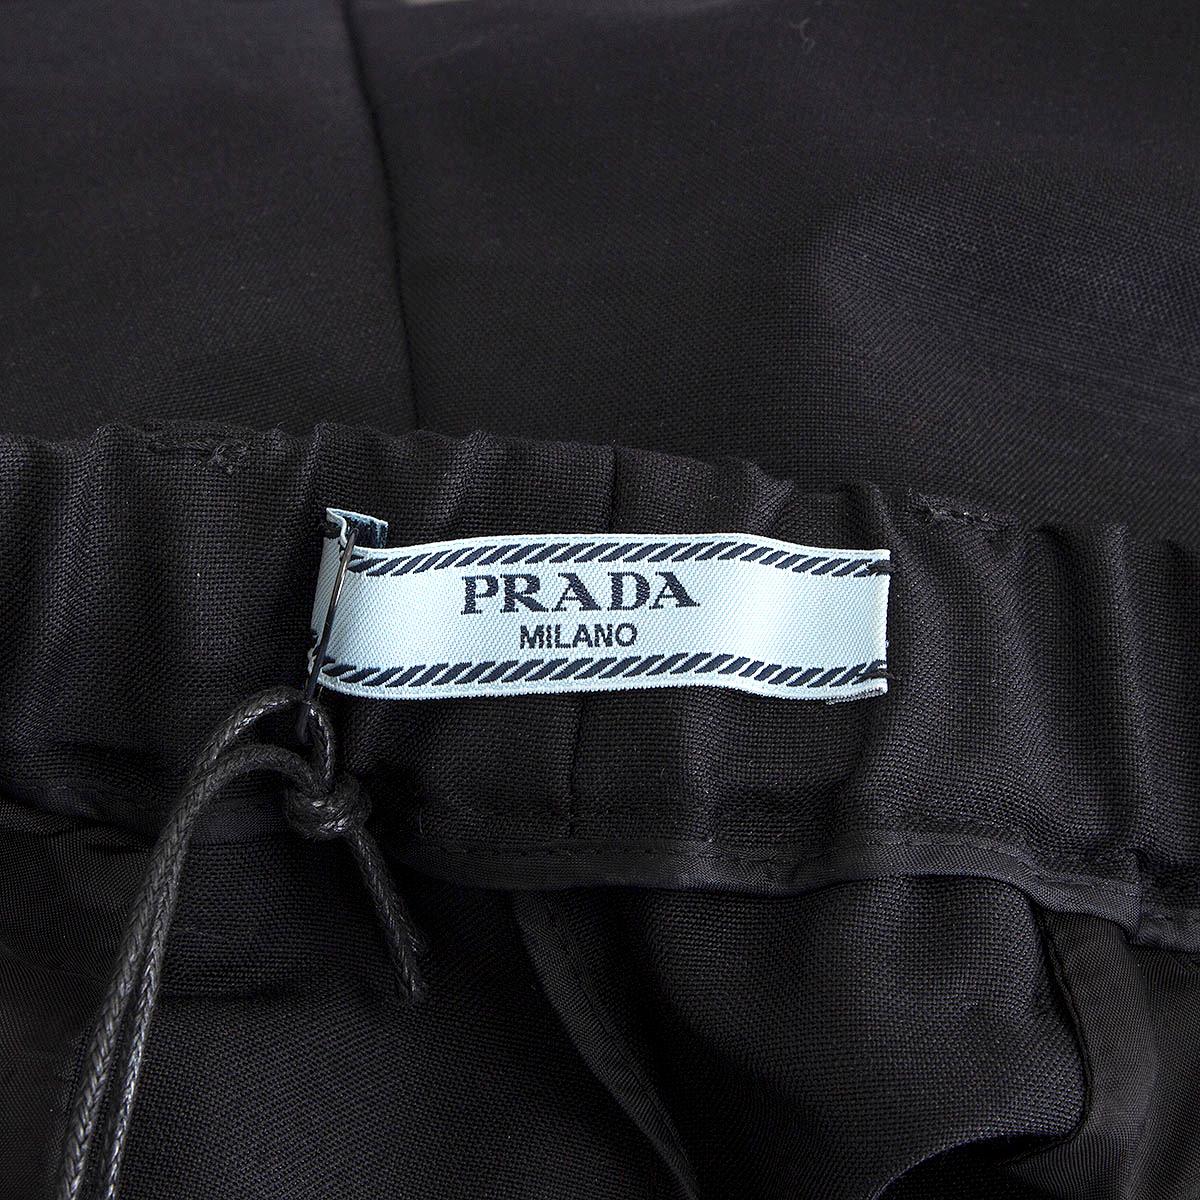 PRADA  charcoal grey 2019 SUMMER KID MOHAIR WIDE LEG Pants 44 L In Excellent Condition For Sale In Zürich, CH